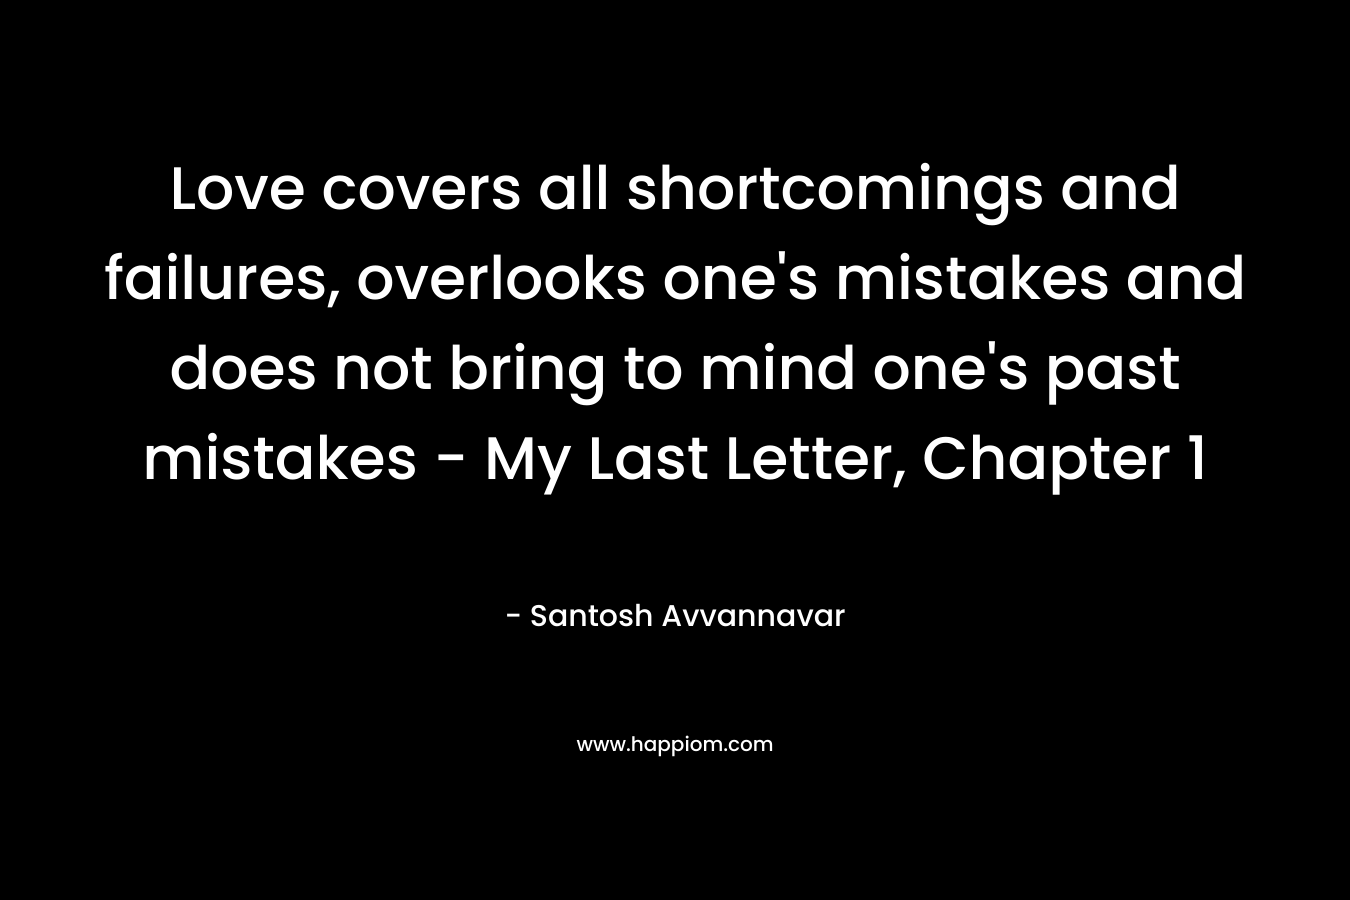 Love covers all shortcomings and failures, overlooks one's mistakes and does not bring to mind one's past mistakes - My Last Letter, Chapter 1